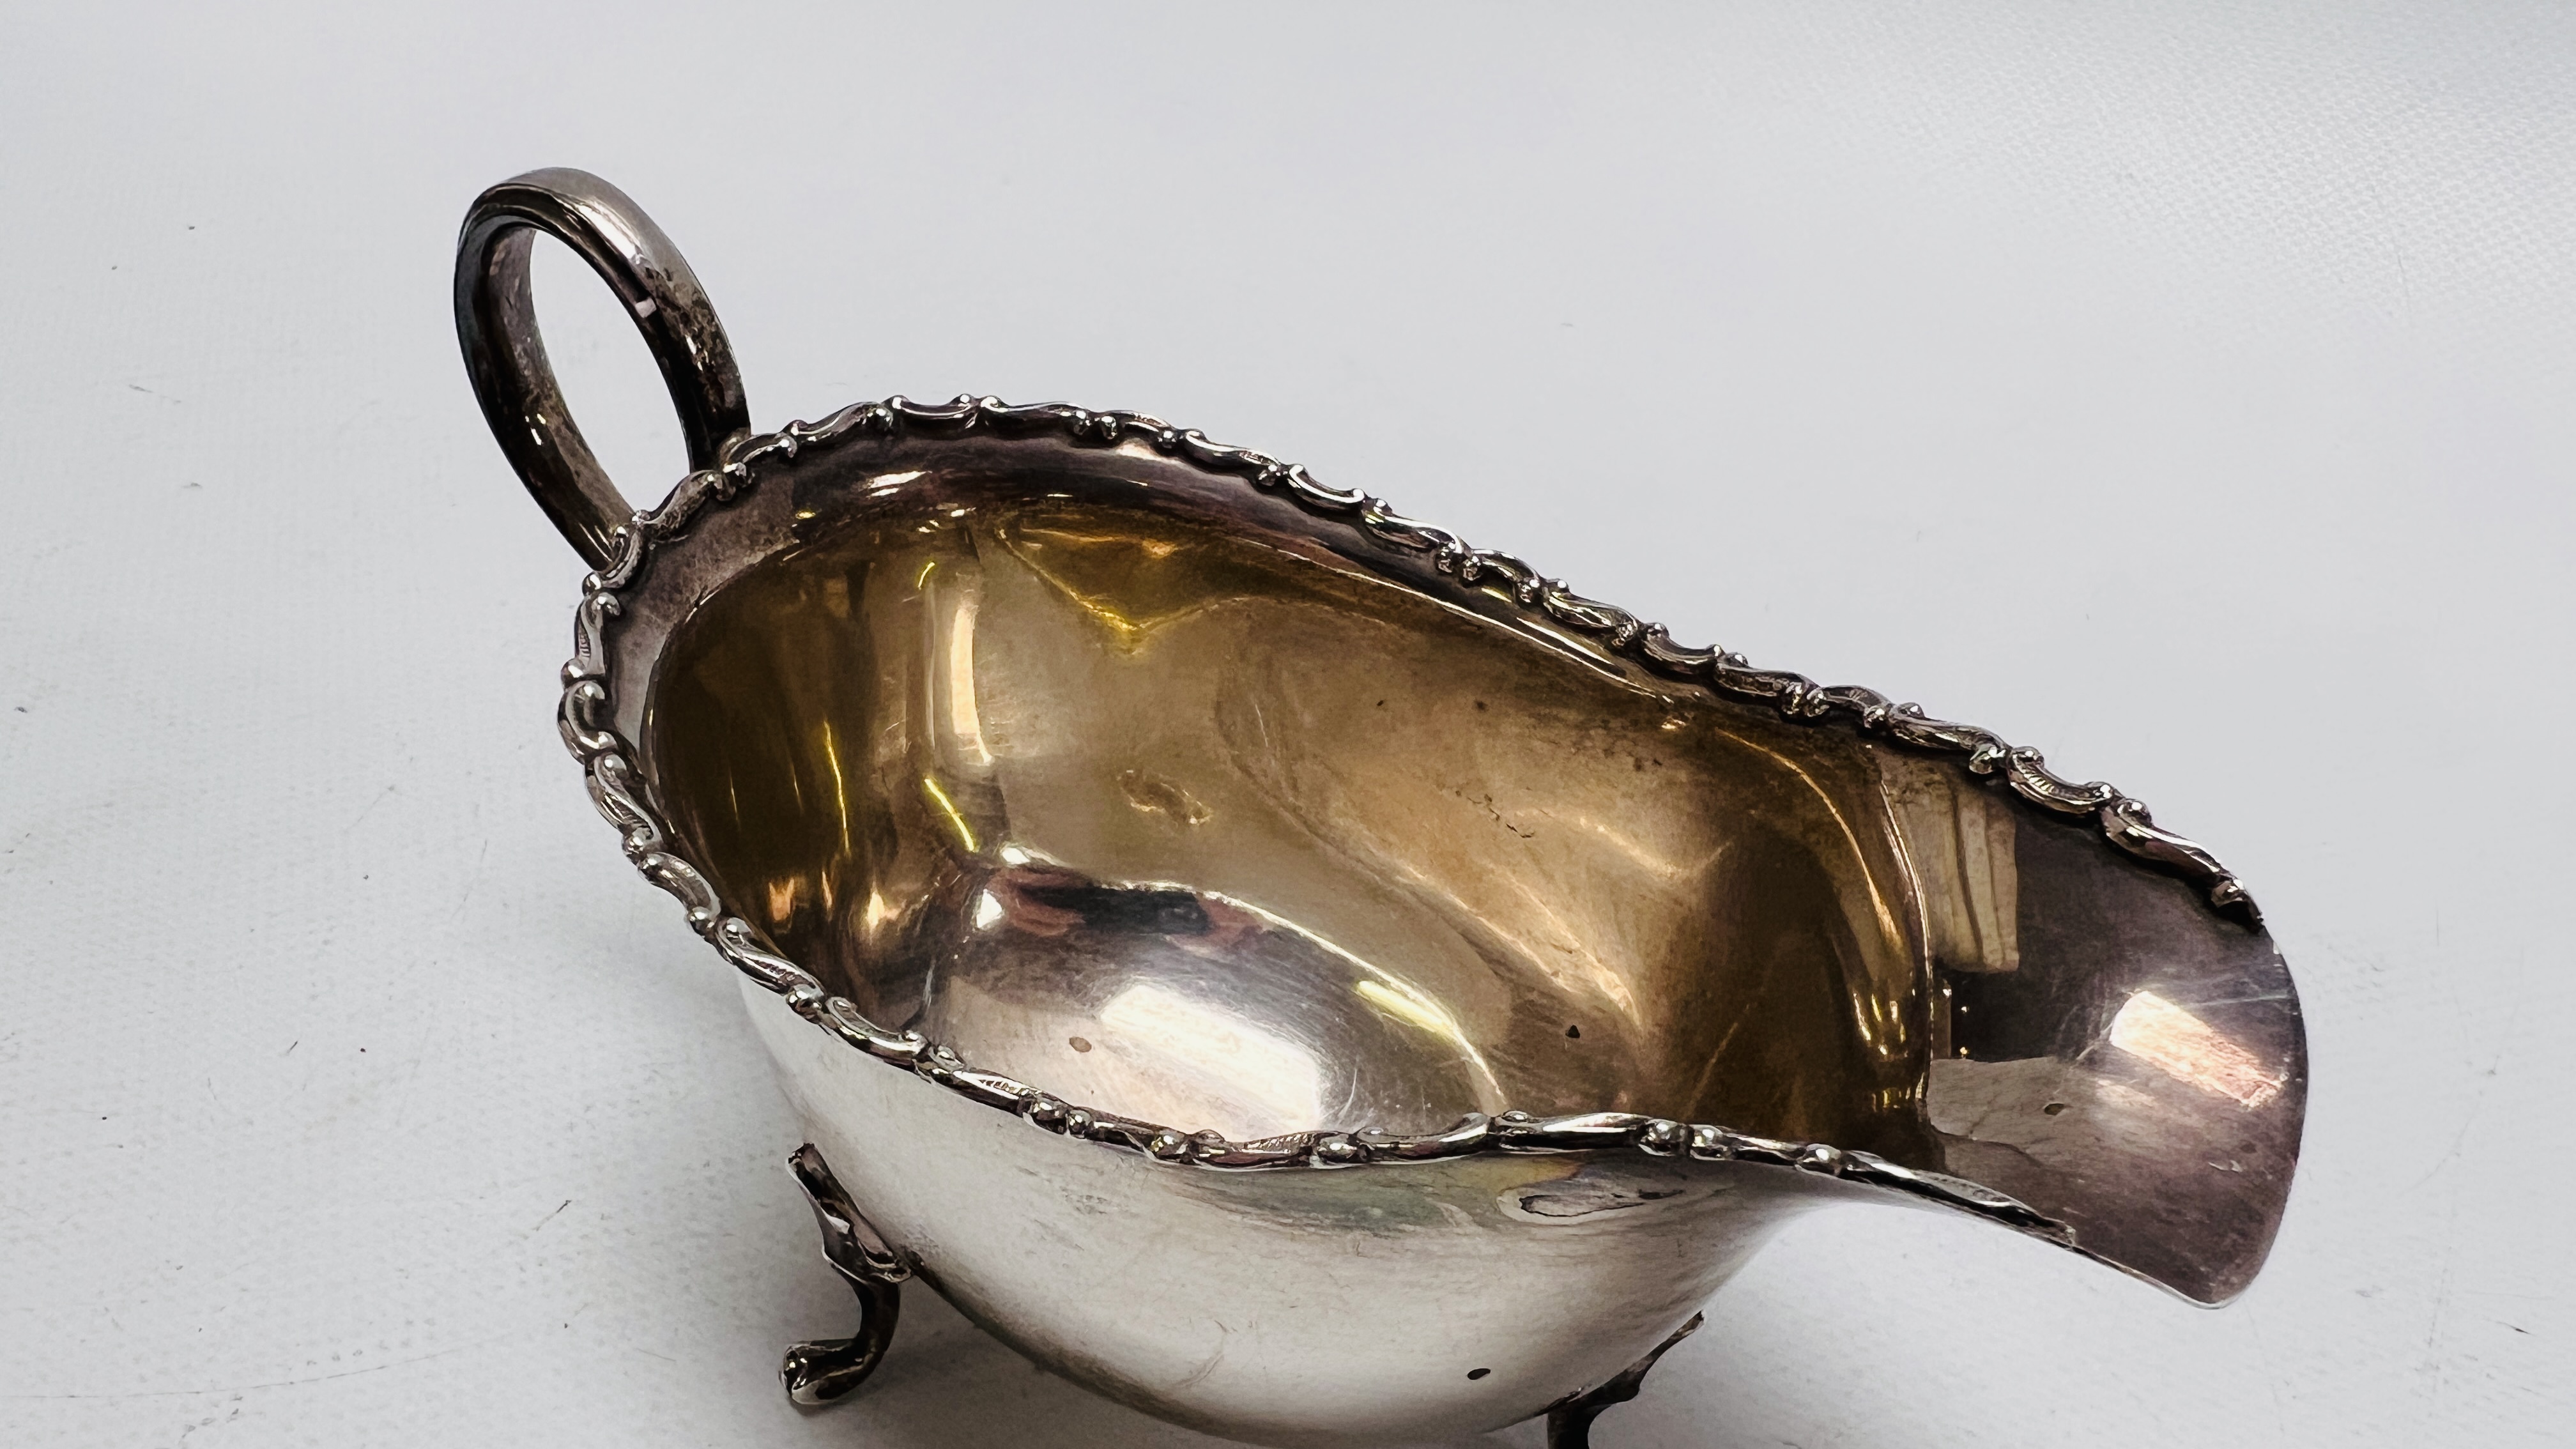 TWO SILVER SAUCE BOATS IN THE C18TH. - Image 4 of 12